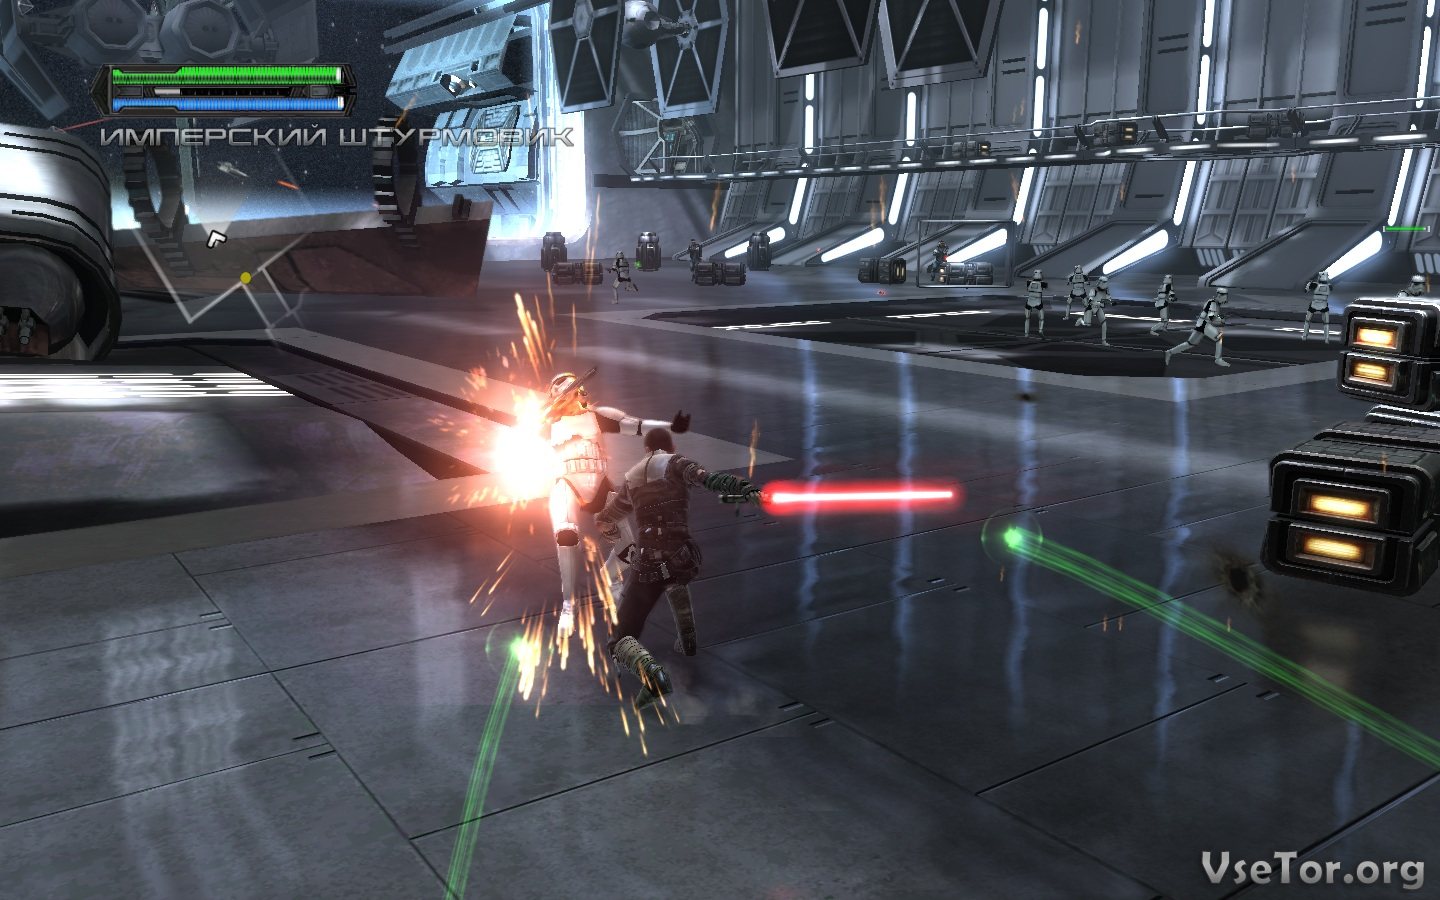 Star wars игры на русском. Star Wars the Force unleashed Ultimate Sith Edition (2009). Star Wars the Force unleashed 1. Star Wars: the Force unleashed - Ultimate Sith Edition. Star Wars: the Force unleashed 1/2.